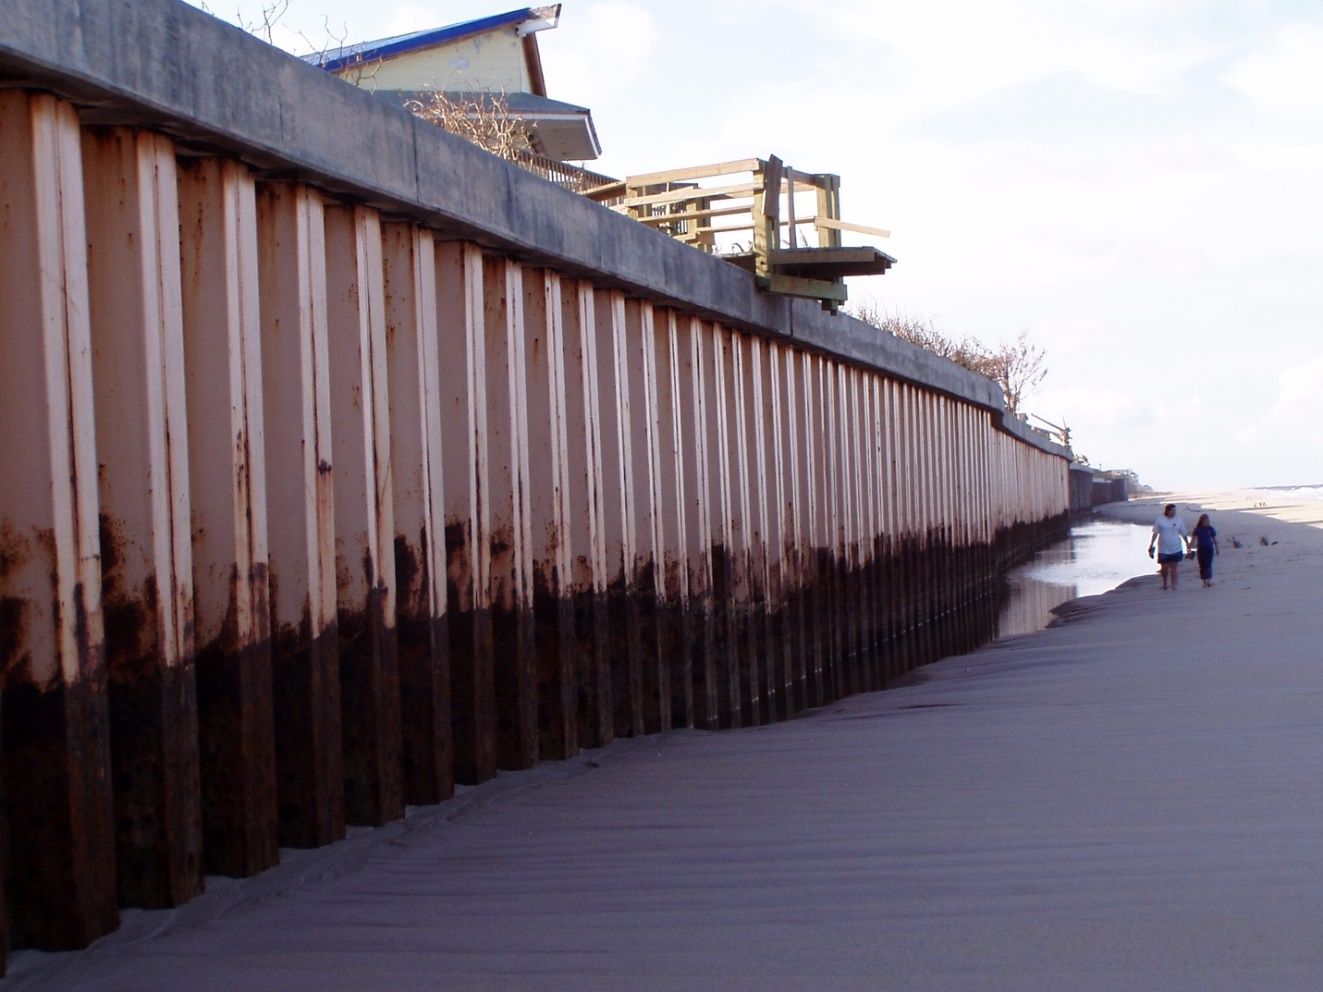 Example of a sheet pile wall where the beach dune system has been disrupted. 